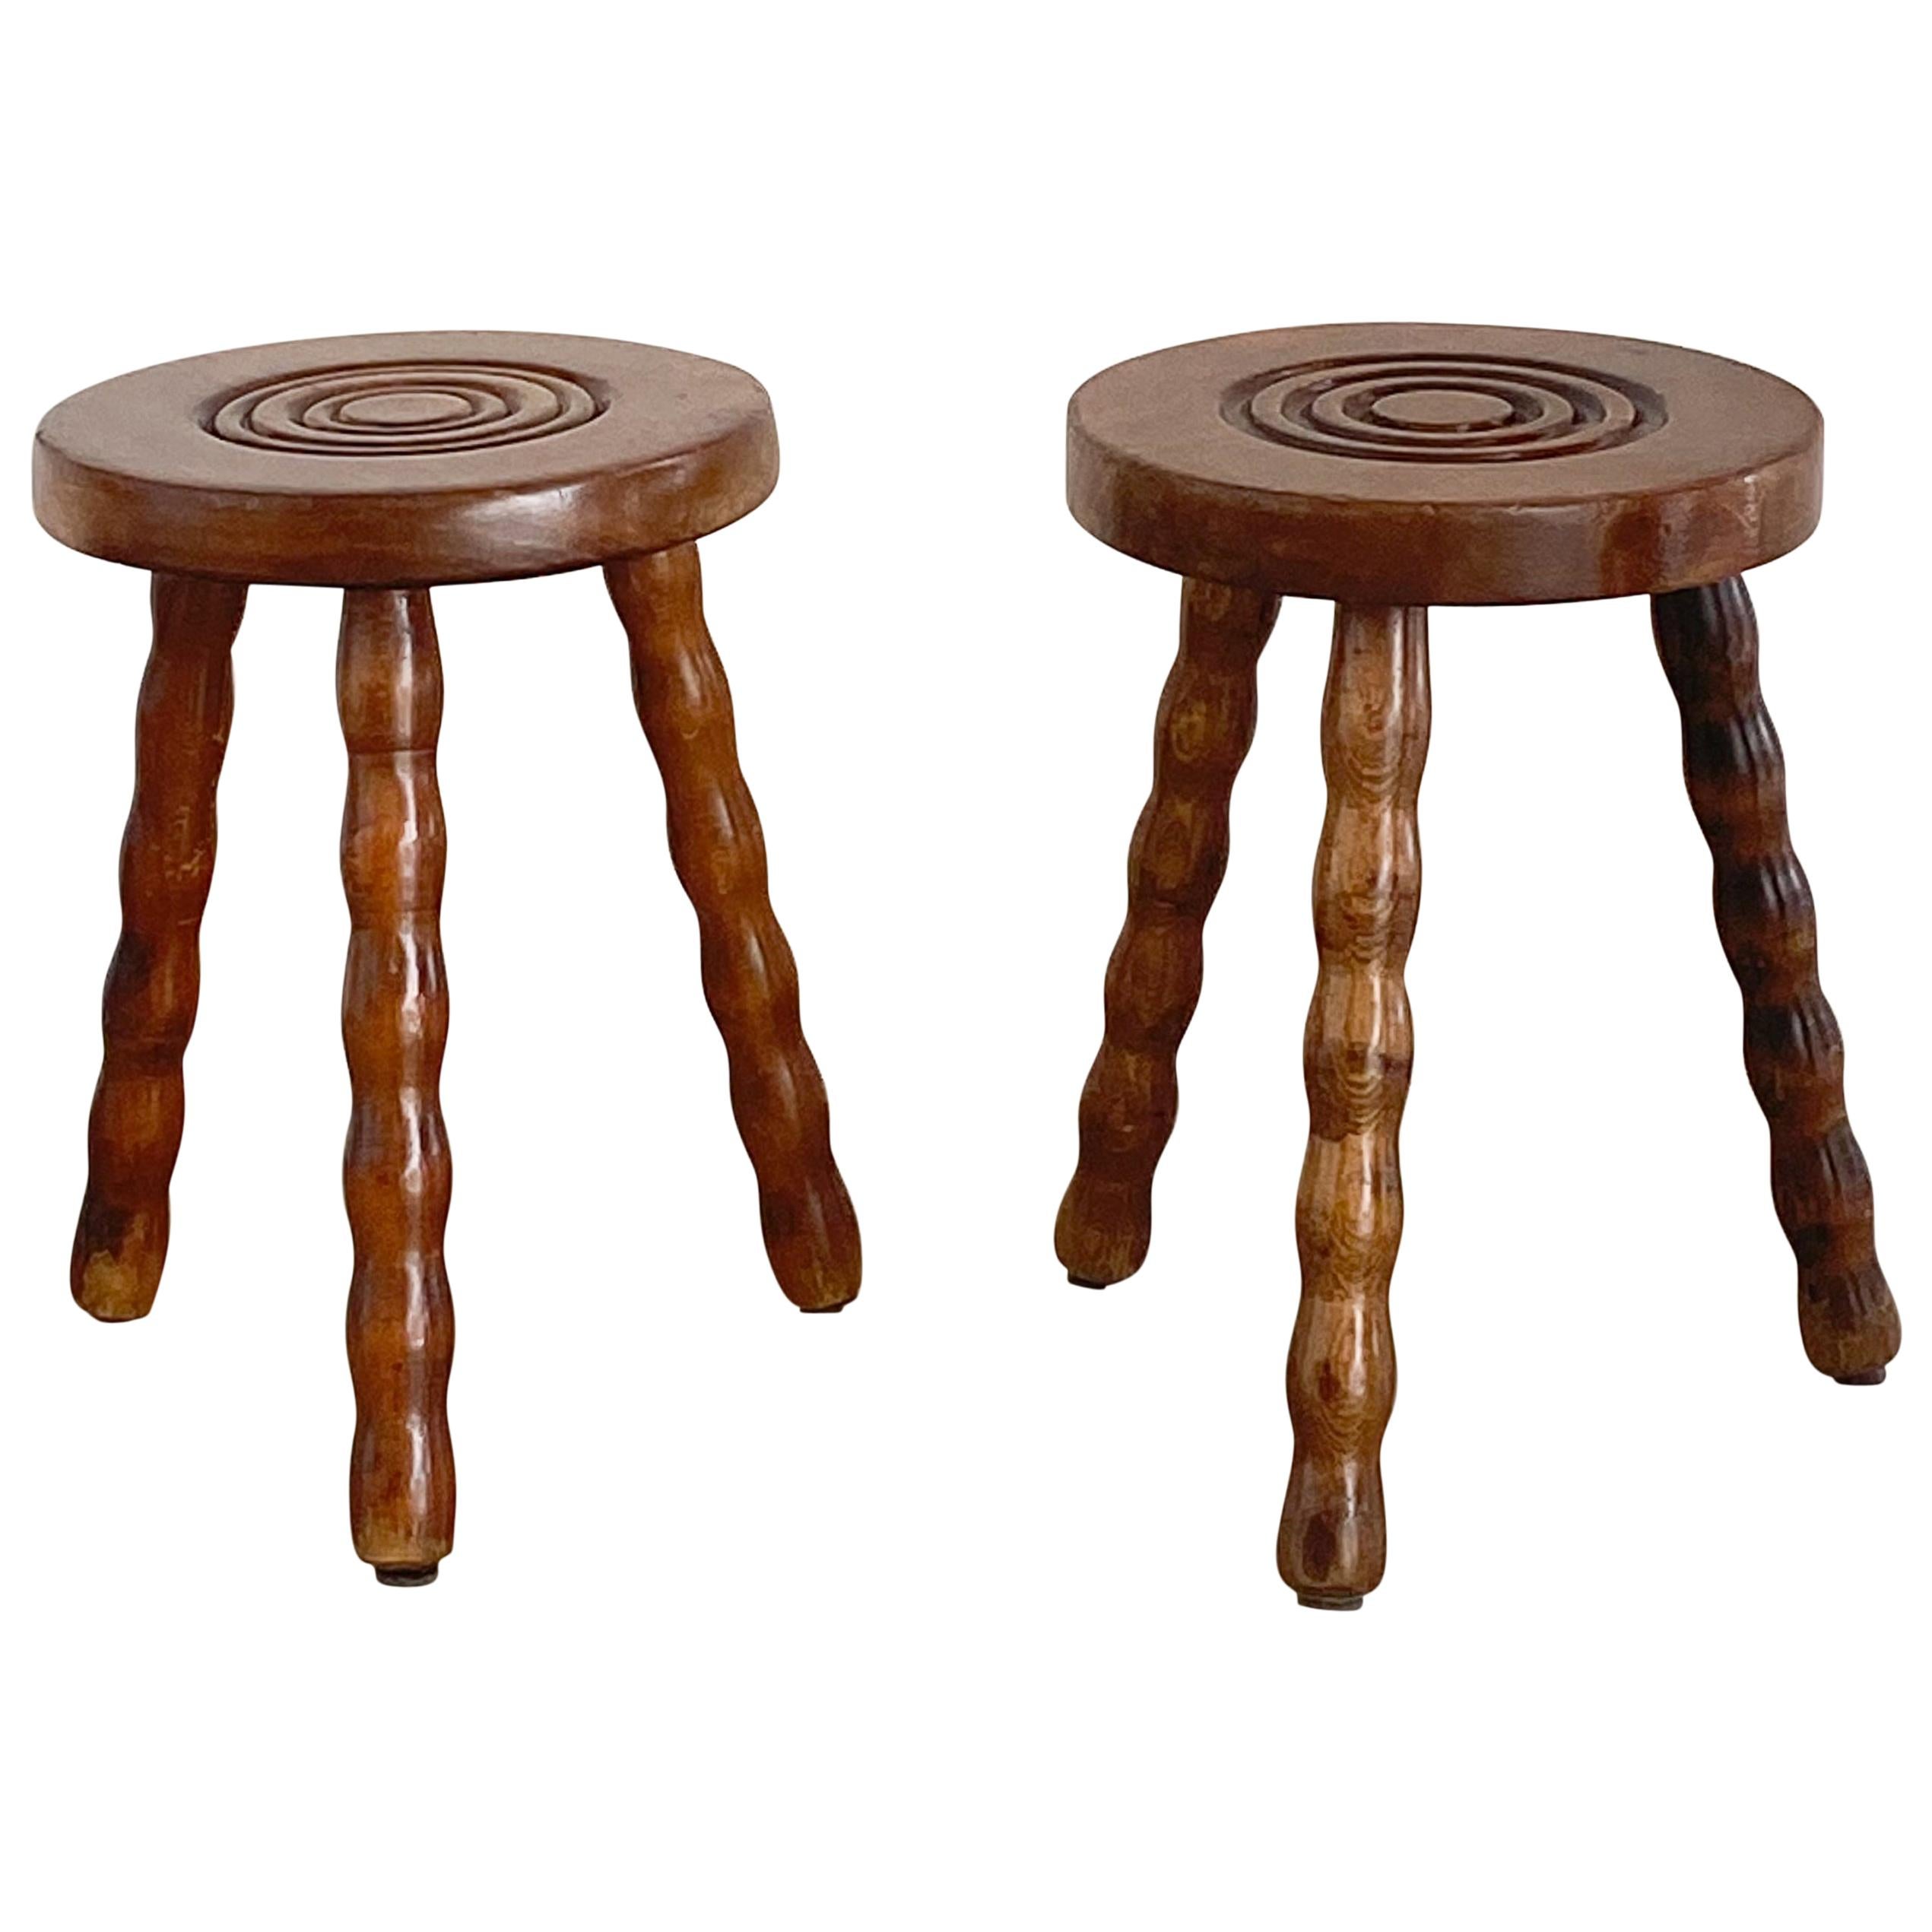 Vintage French Wood Stools